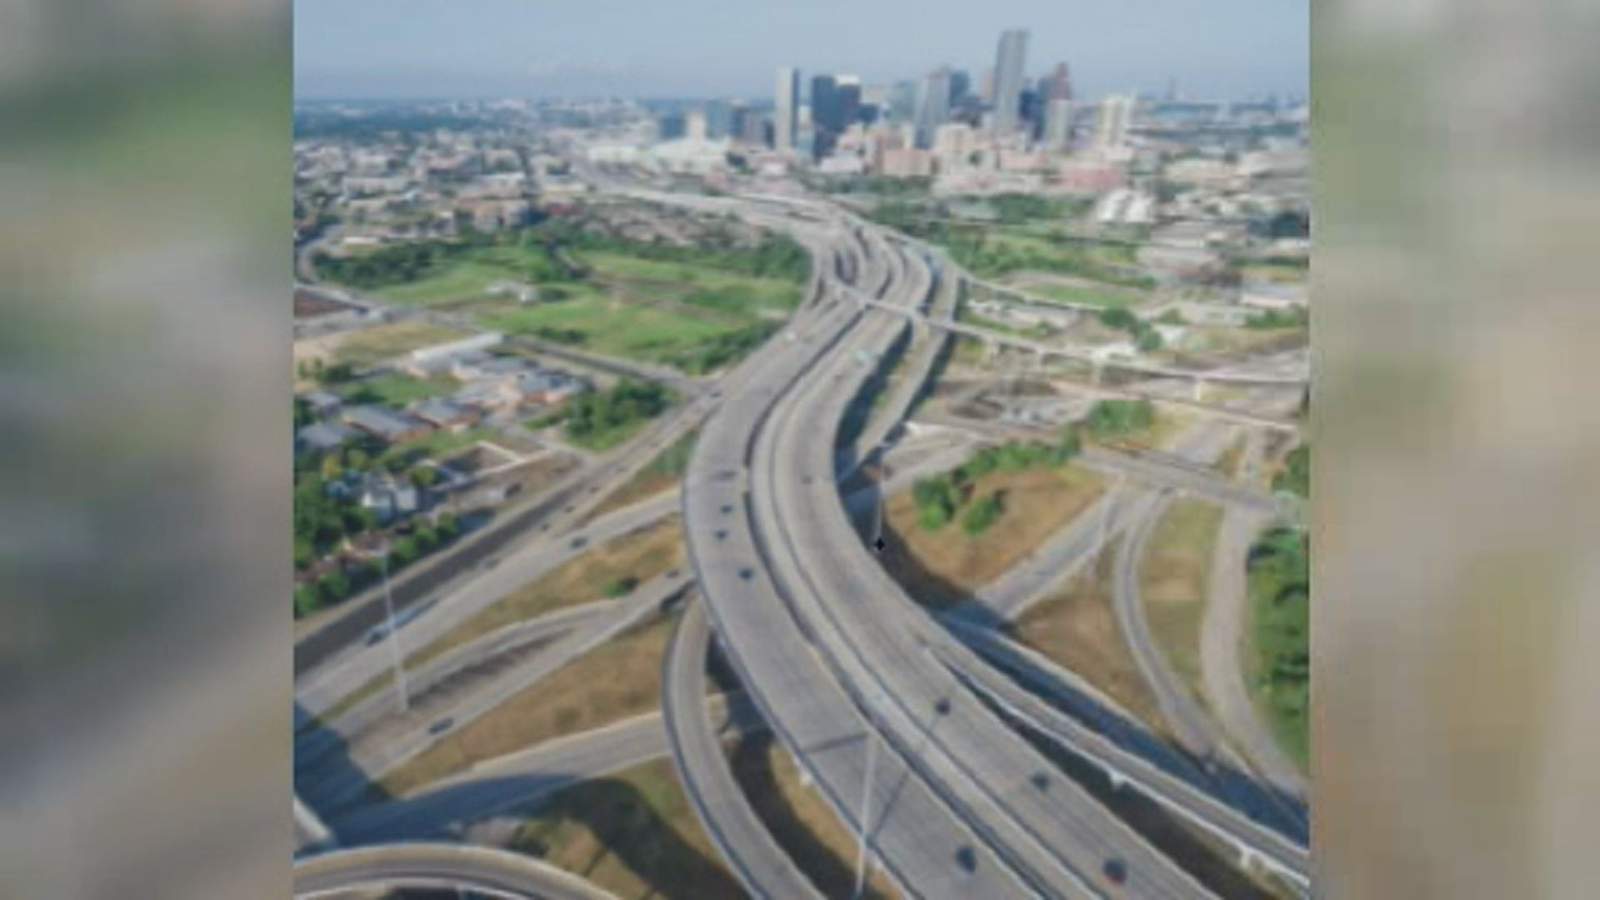 Local leaders concerned I-45 widening plan will create bigger flooding issues in corridor